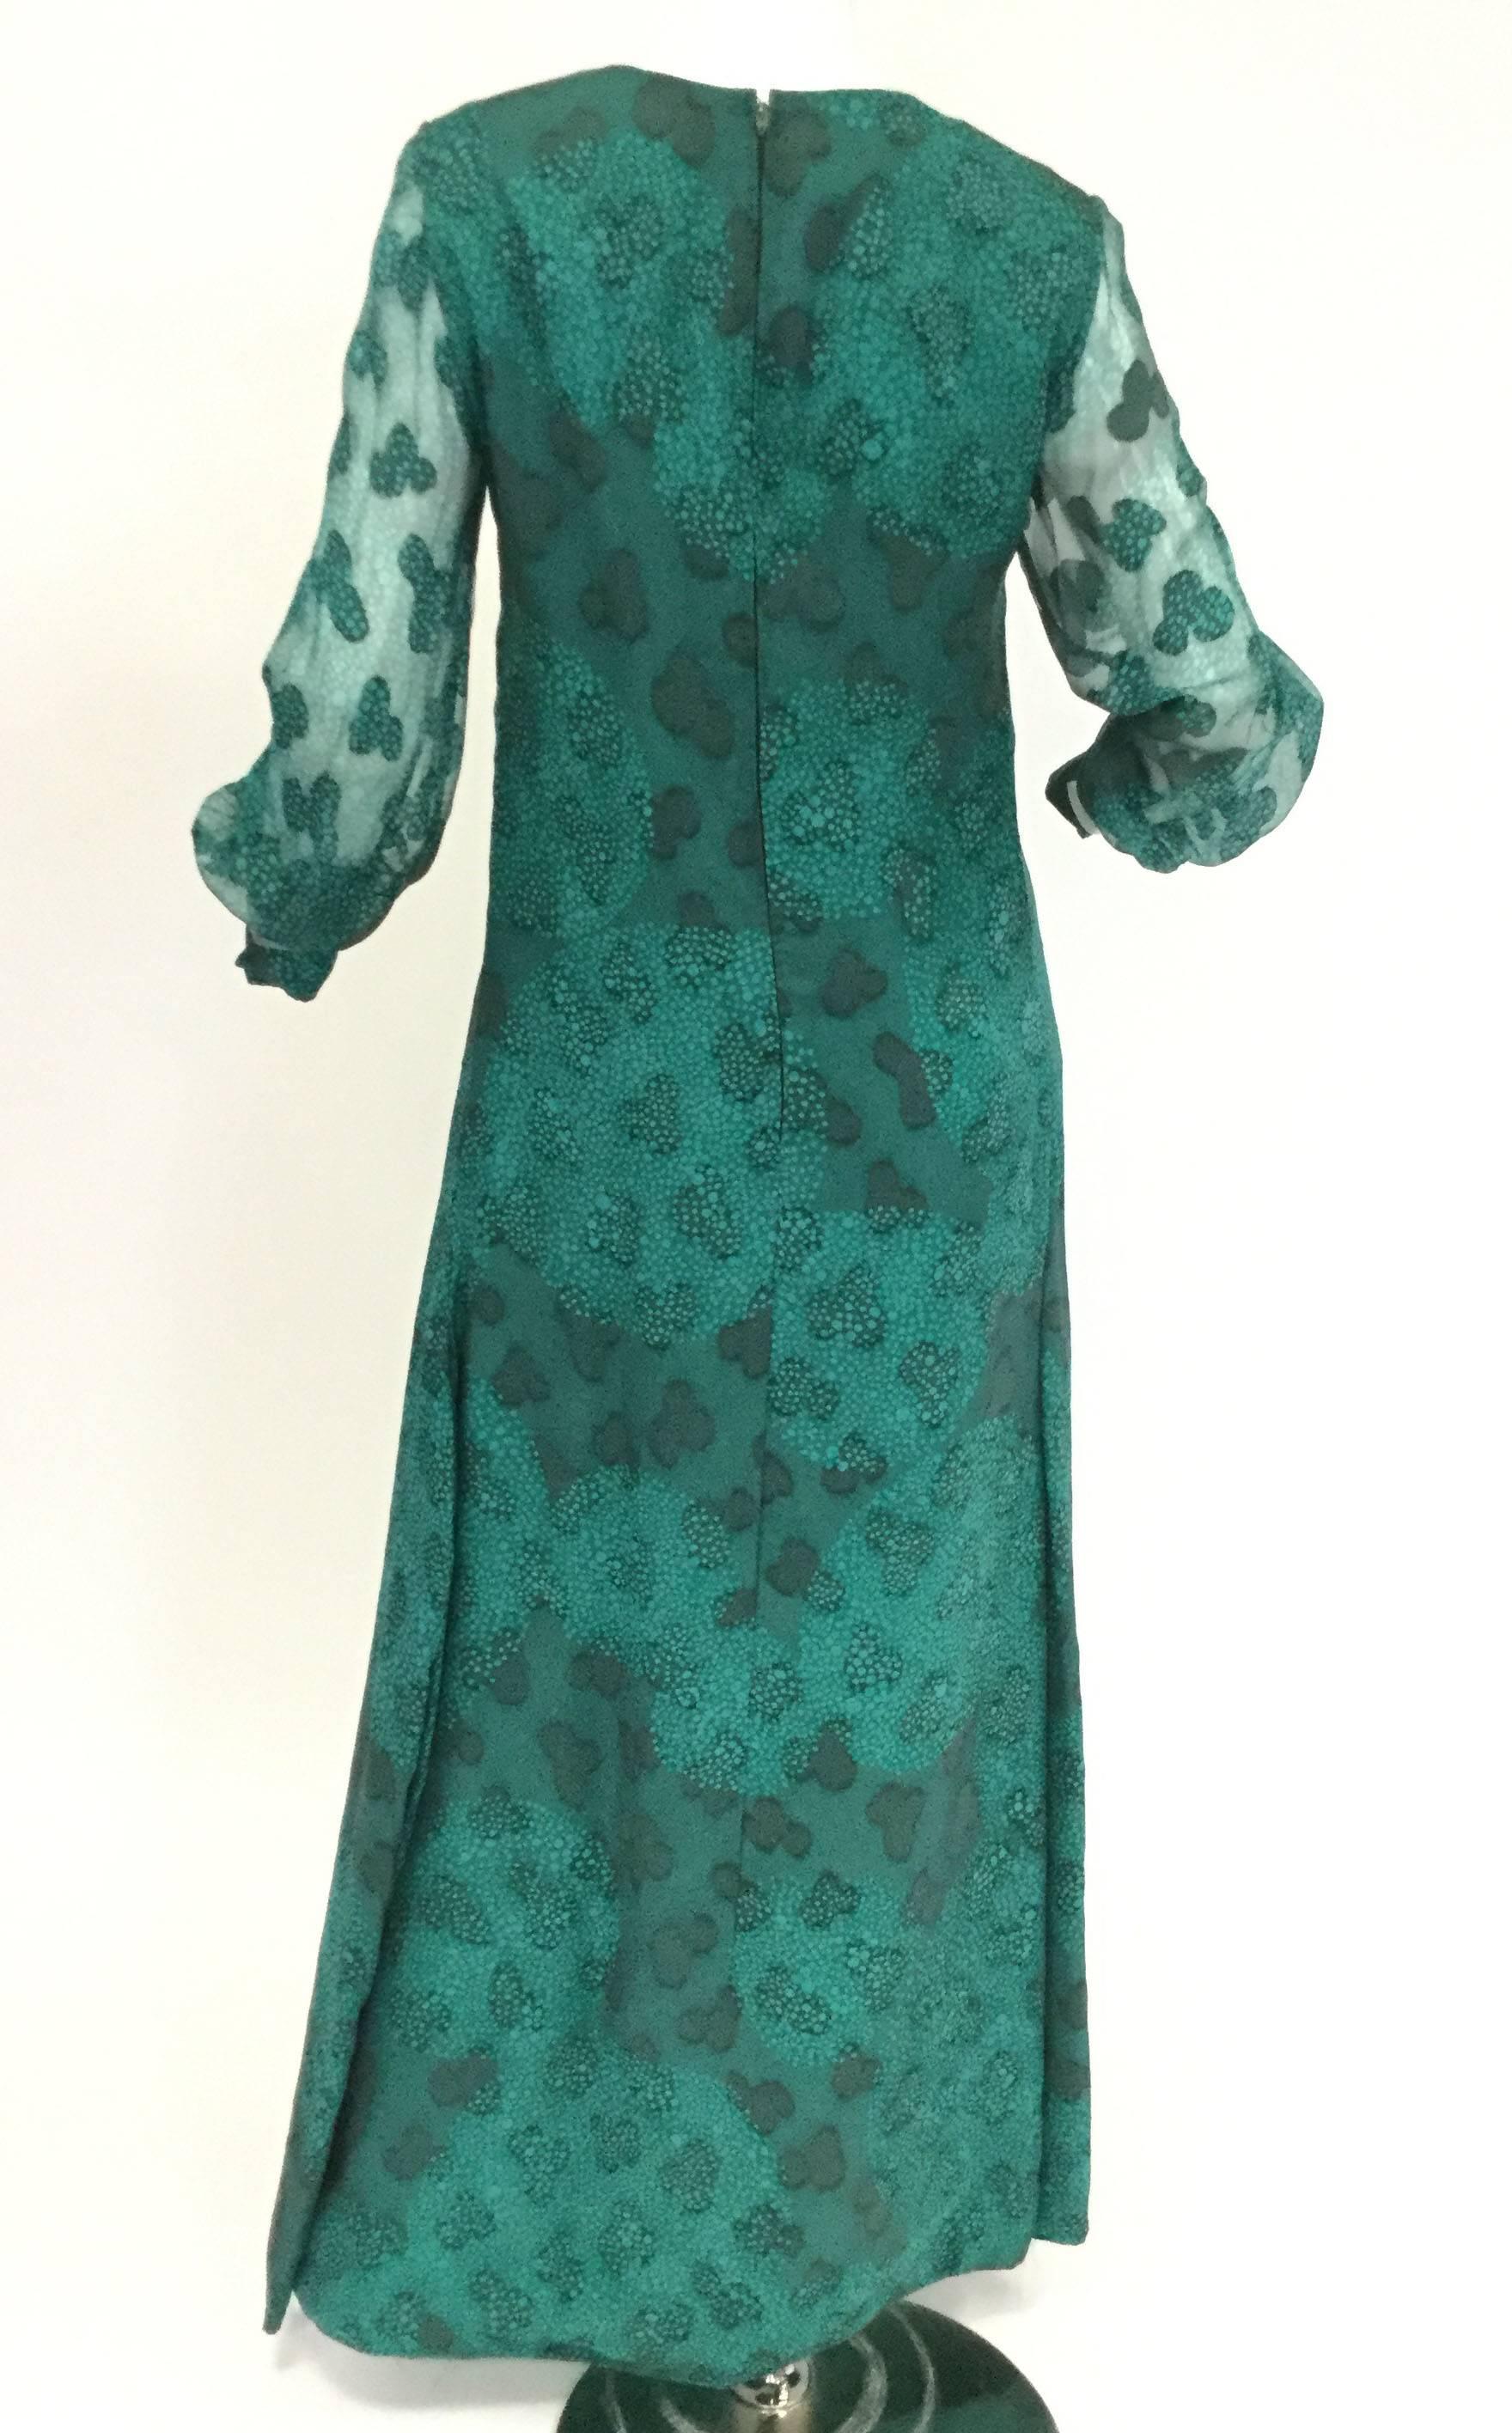 
This beautiful and fun  dress by Esther Wolf is absolutely fantastic! This maxi dress has long, sheer, voluminous, cuffed sheer bishop sleeves and a jewel neckline. The dress features a three-leaf clover and speckled dot composite overlay pattern